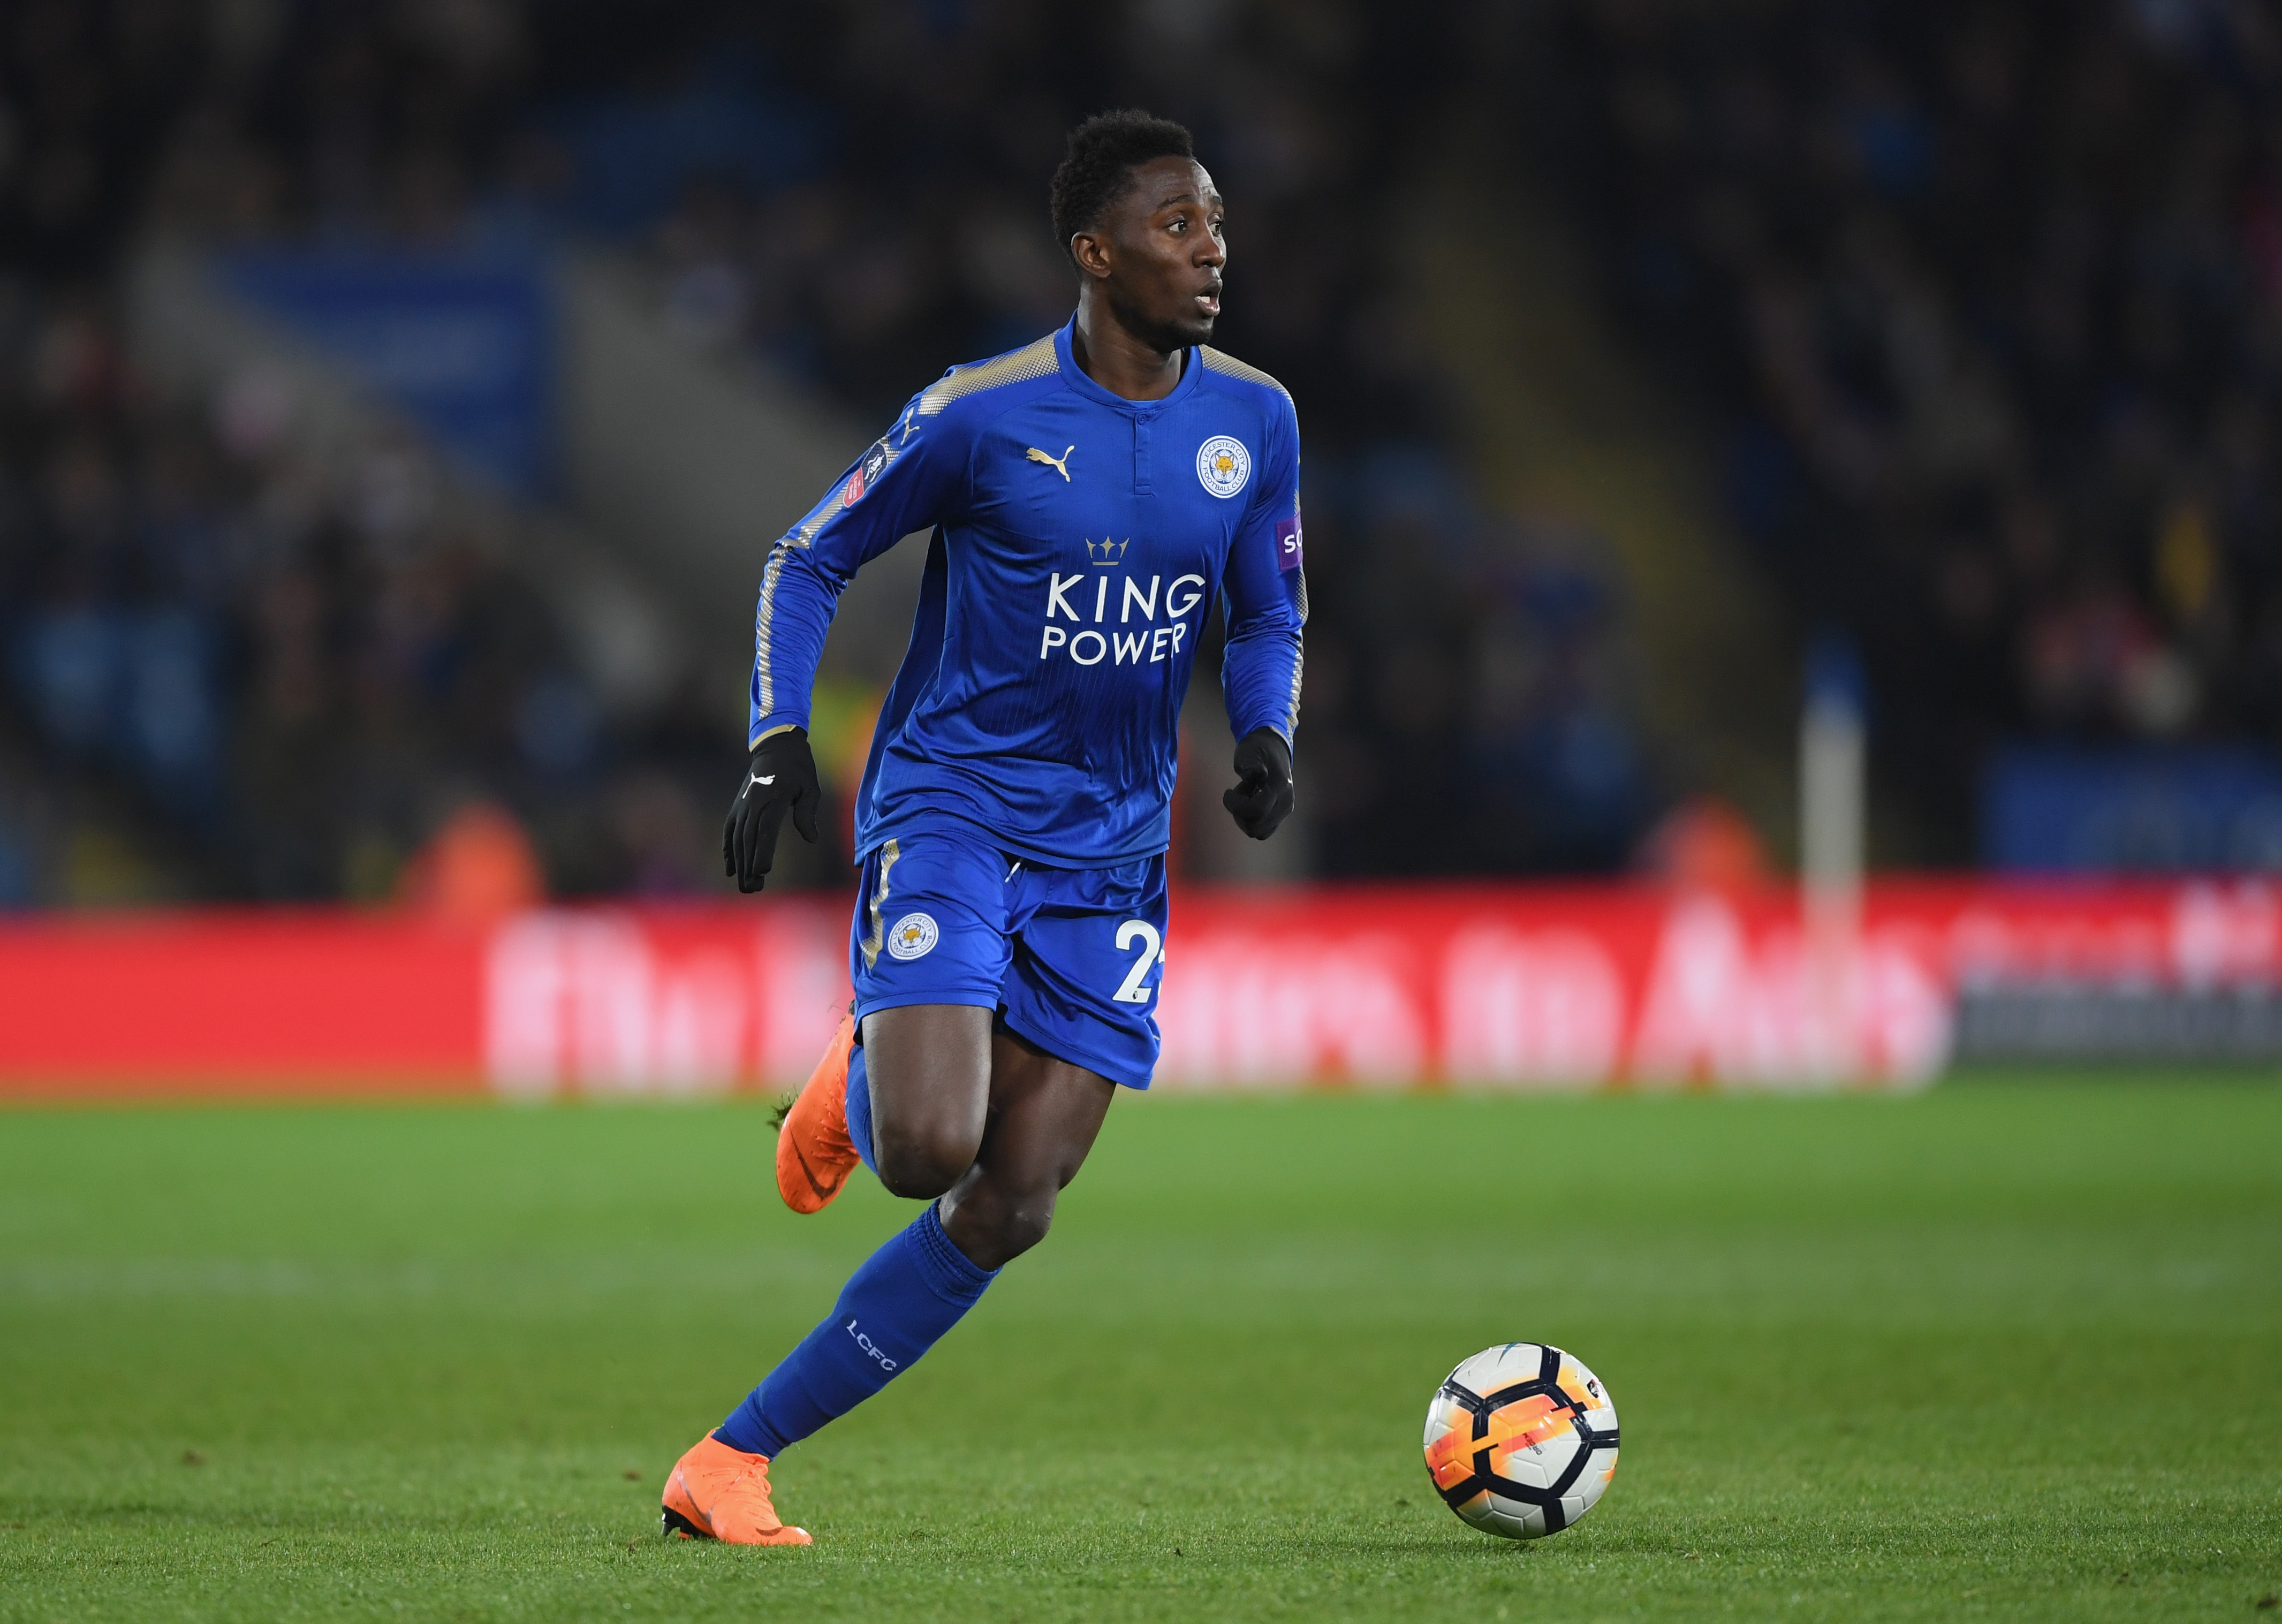 Can Ndidi replicate his club form at the World Cup? (Picture Courtesy - AFP/Getty Images)